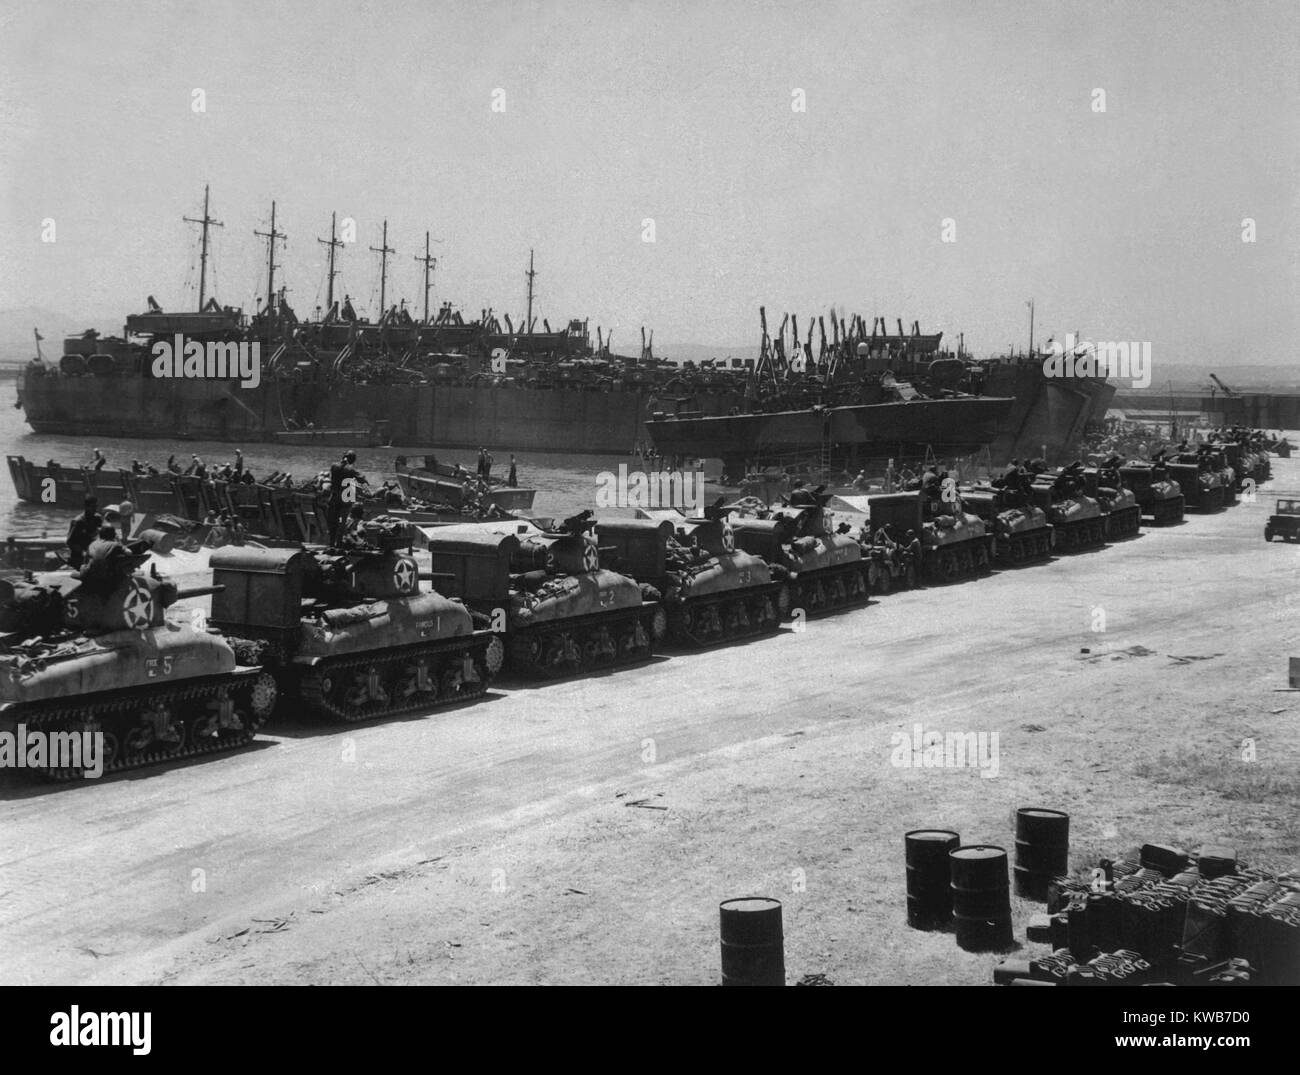 Two days before the Allied invasion of Sicily, tanks board landing craft. Ships are at the French Naval Base, La Pecherie, Tunisia. July 1943, World War 2. (BSLOC 2014 10 19) Stock Photo